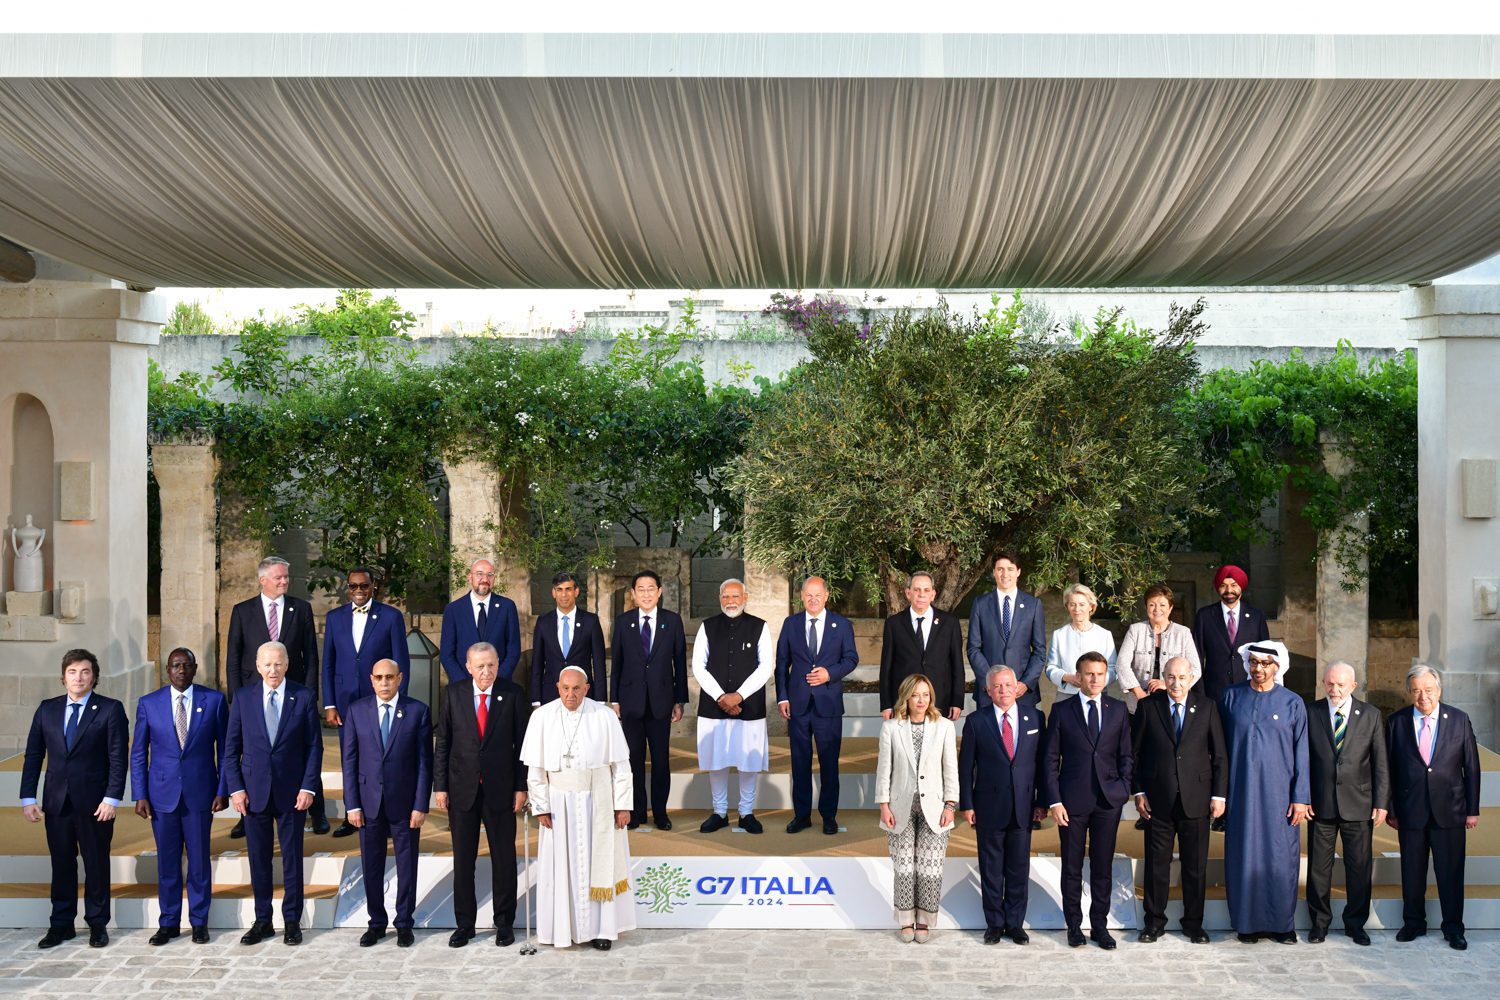 G7 Summit: World Leaders Pose for 'Outreach Nation' Session Family Photo